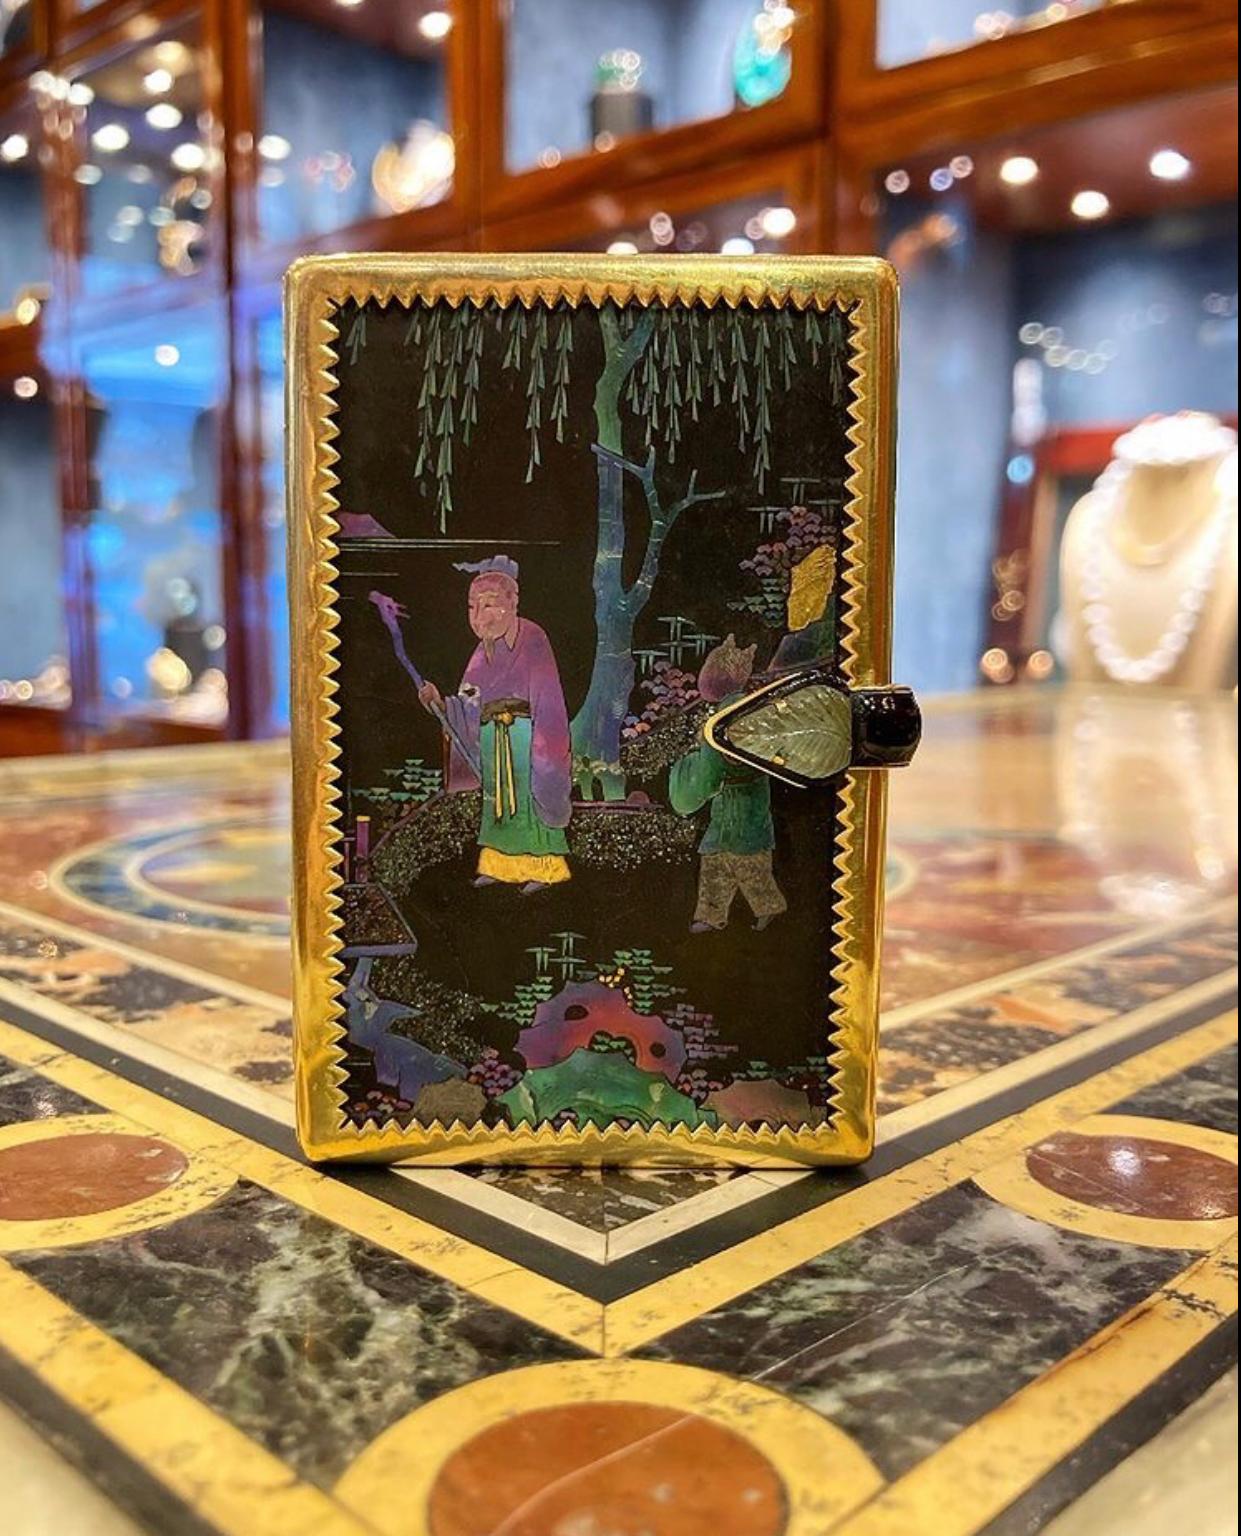 A rare collectible Art Deco Cartier lacque burgauté vanity case featuring a carved emerald and onyx thumb piece. It depicts an Eastern scene in iridescent mother of pearl, accented by diamonds on the reverse and coral pillars at the sides. Made in